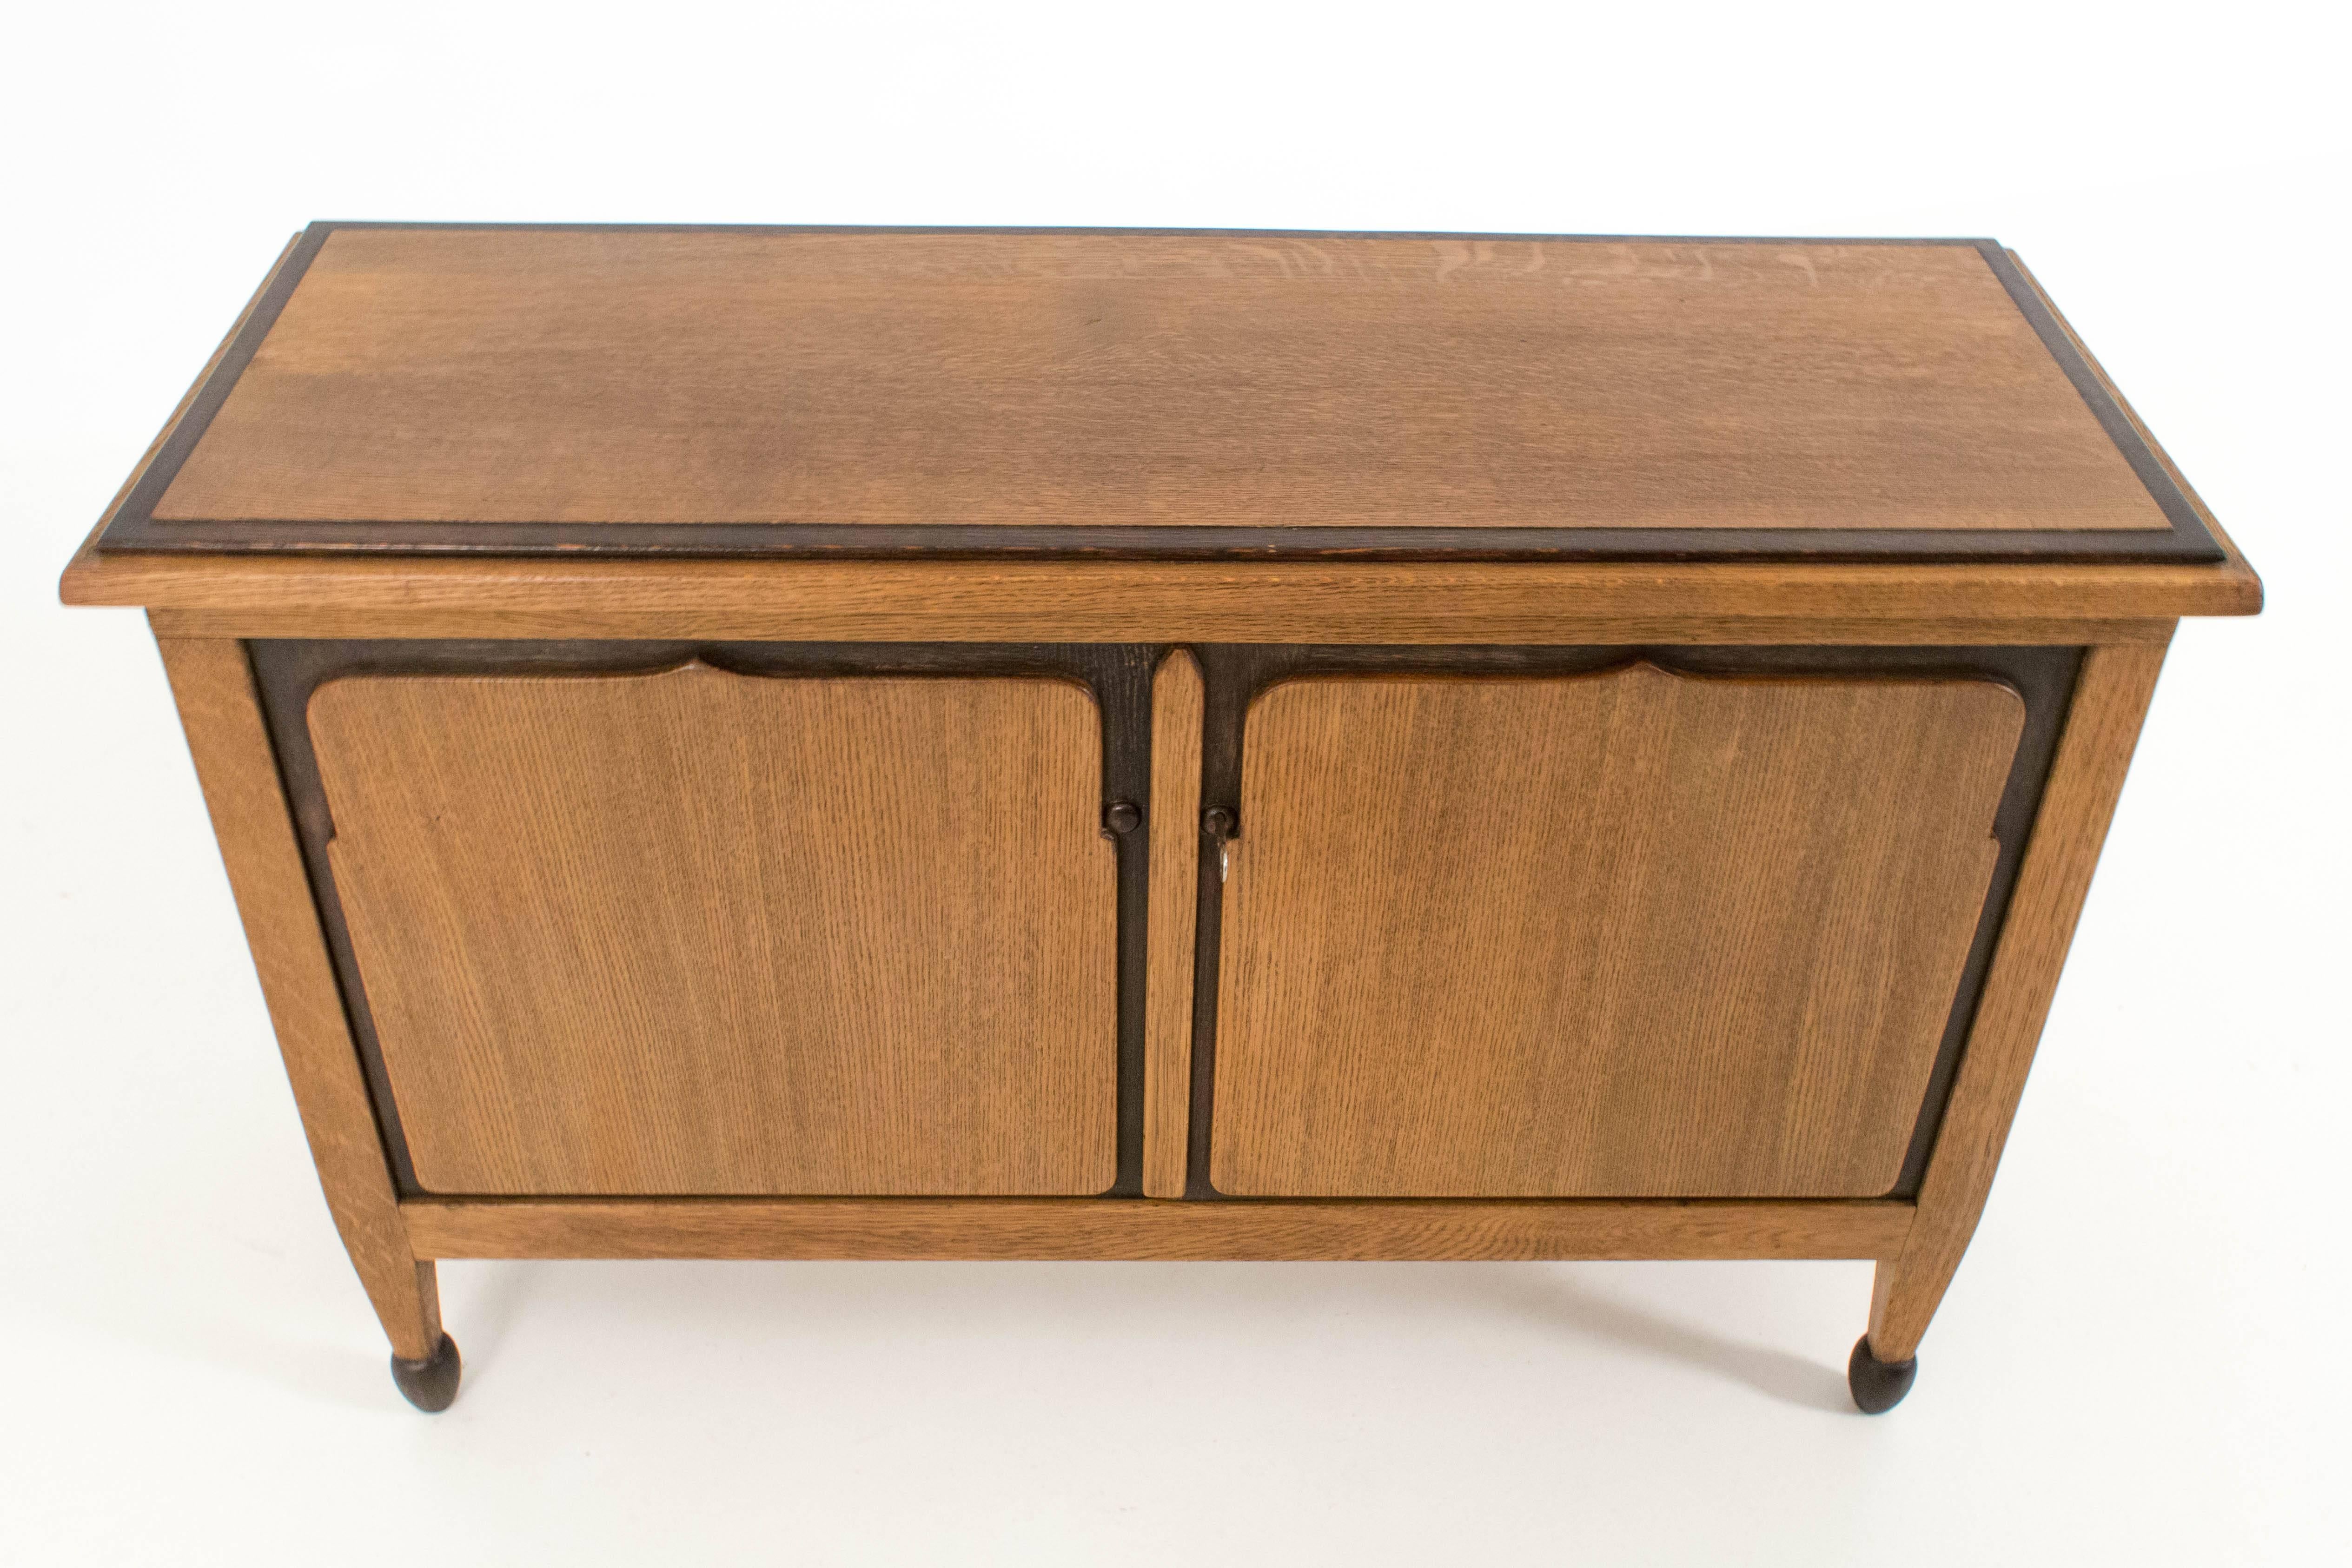 Stunning Art Deco Amsterdam school sideboard by Willem Penaat.
Solid oak with original ebonized details.
In good original condition with minor wear consistent with age and use,
preserving a beautiful patina.